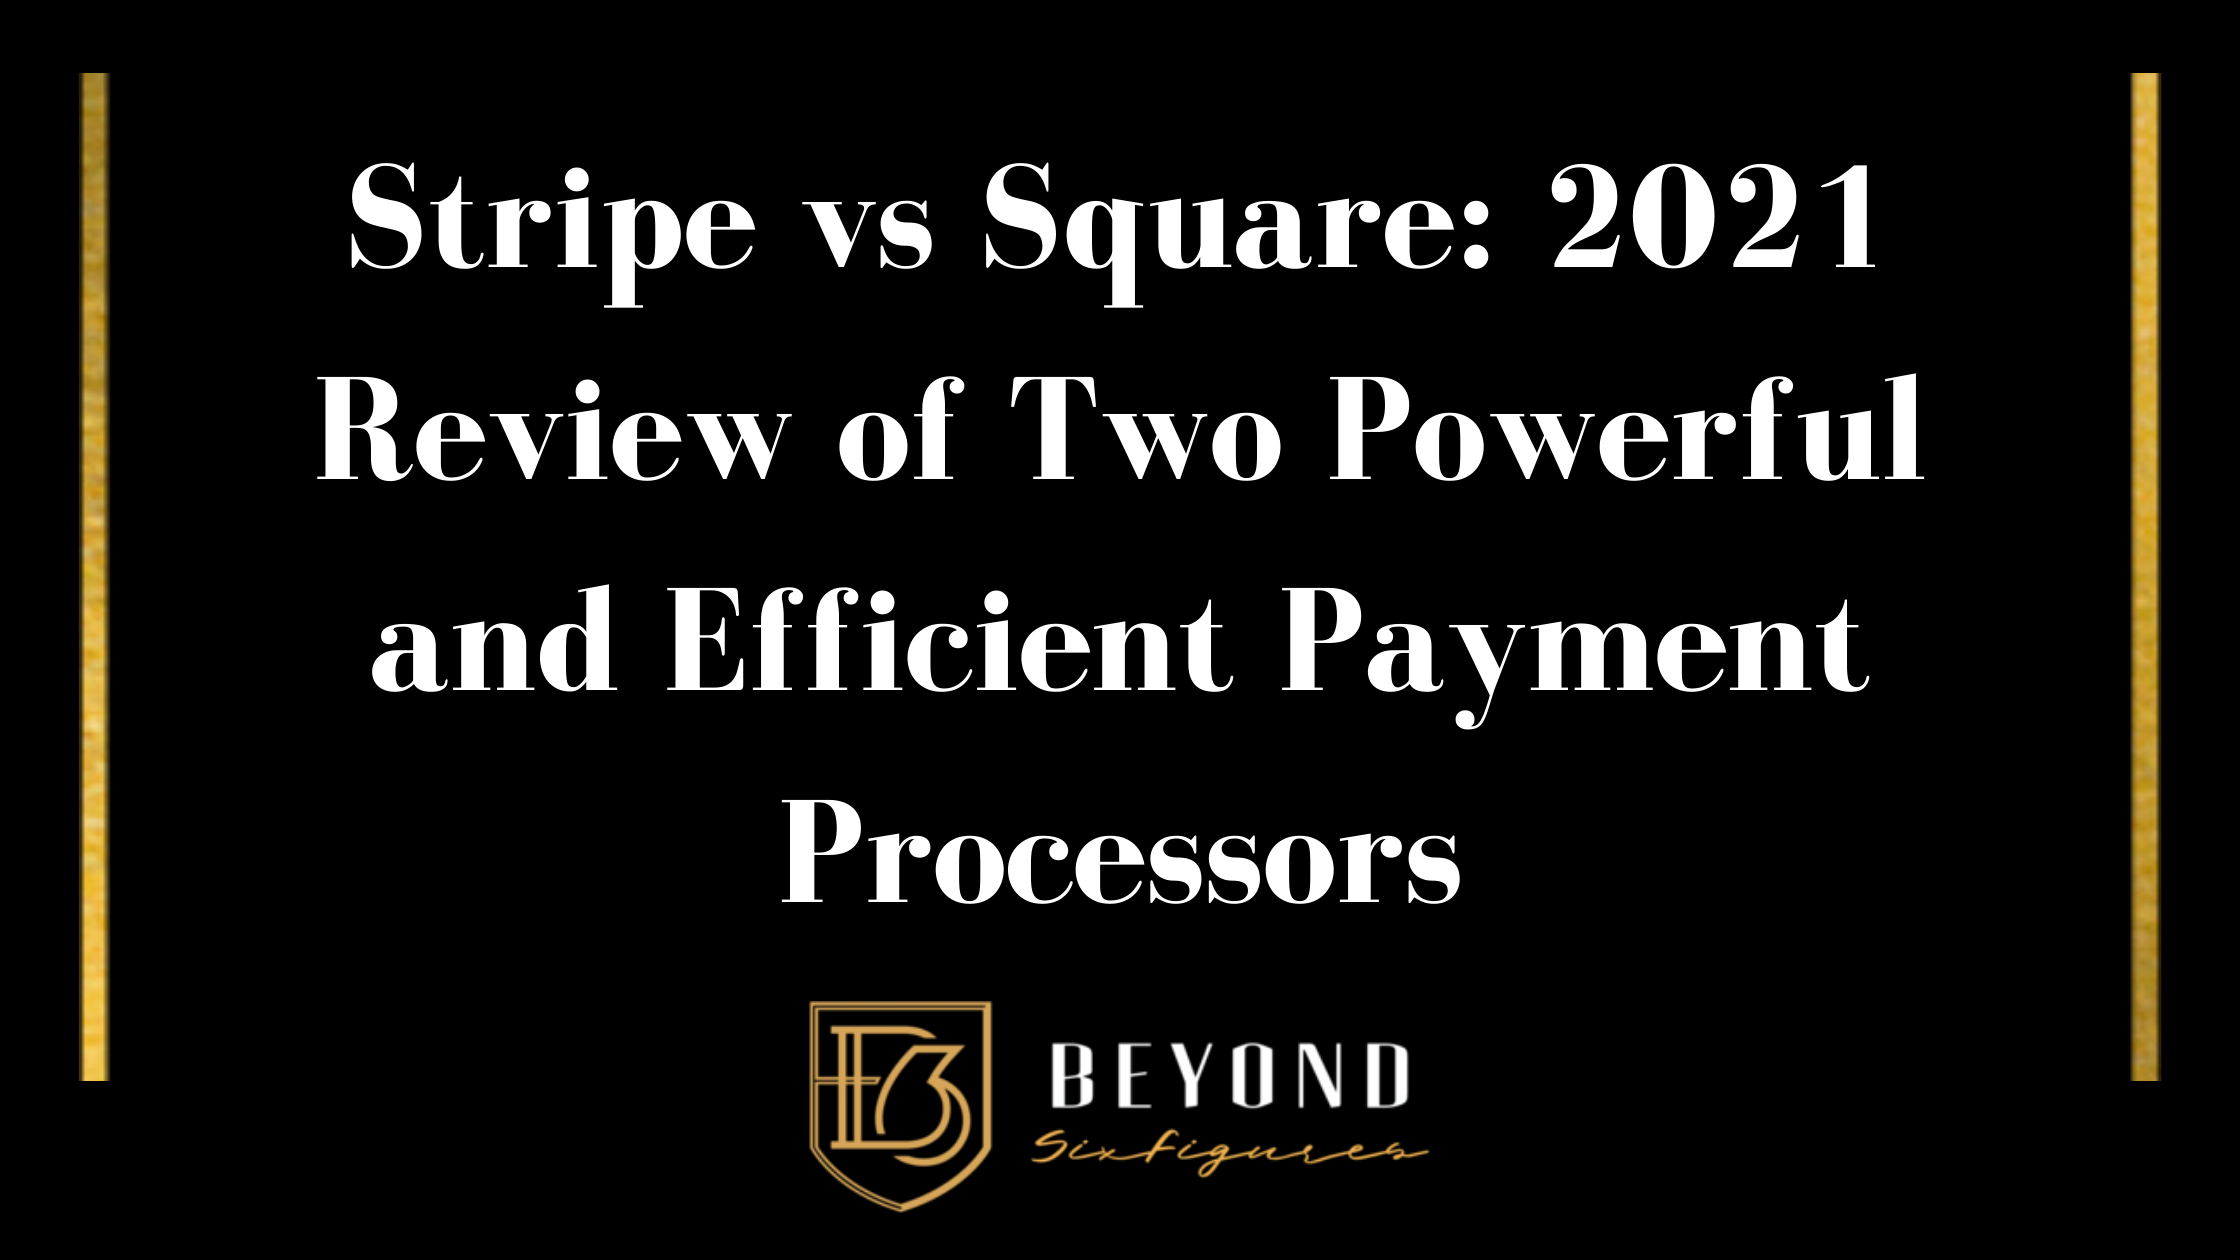 Stripe vs Square: 2021 Review of Two Powerful and Efficient Payment Processors Blog Banner